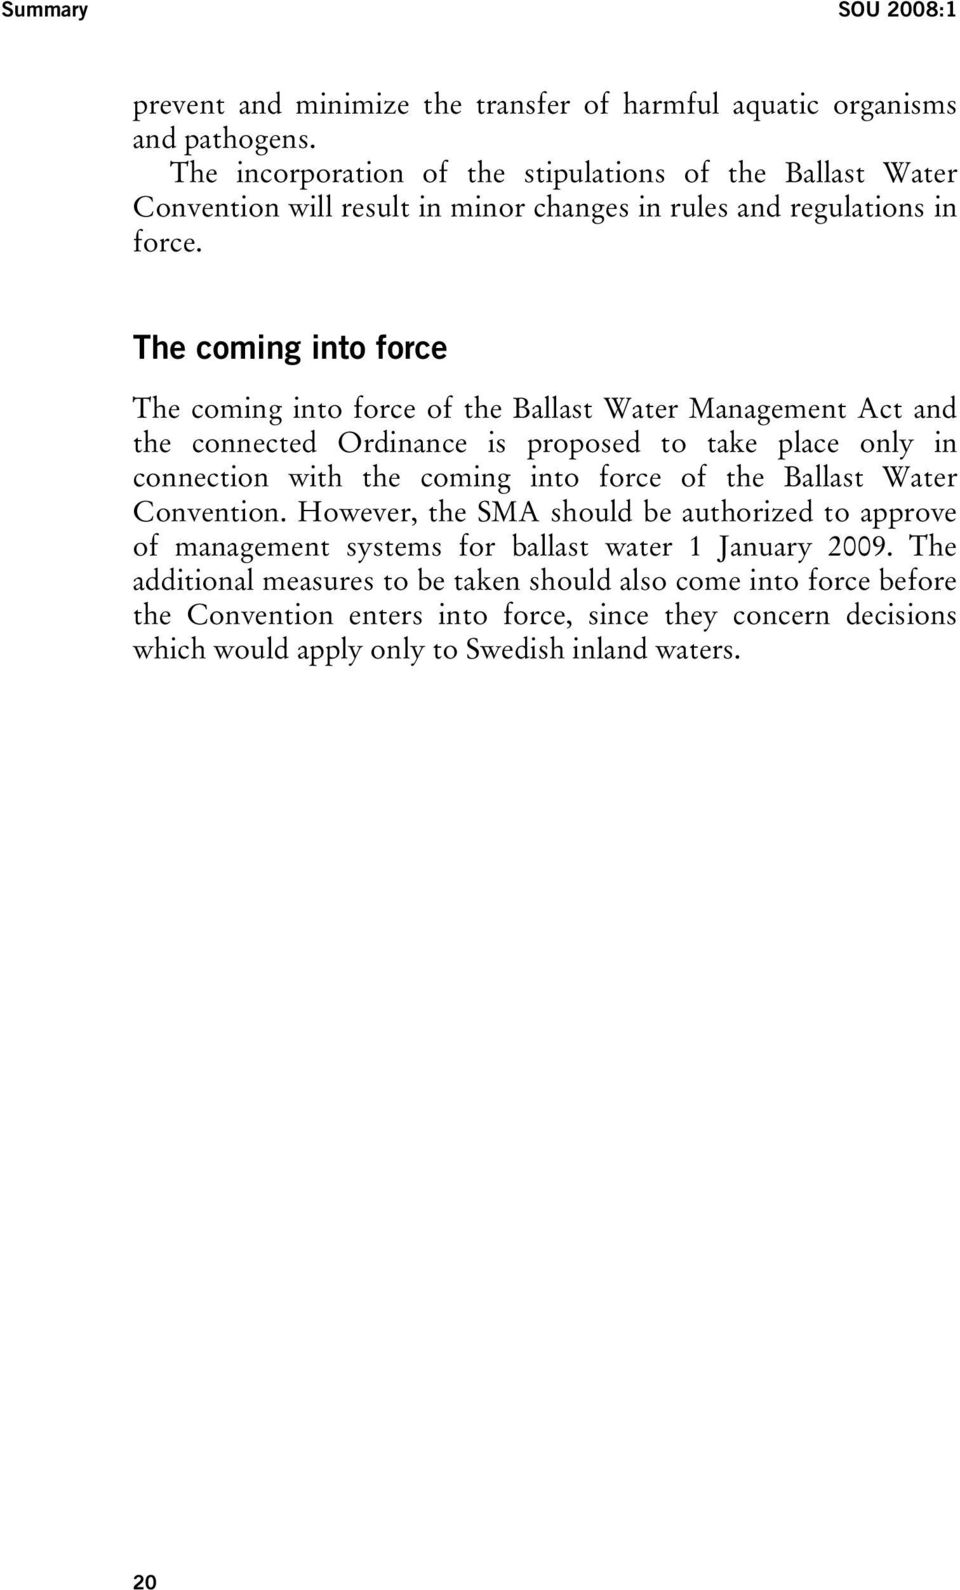 The coming into force The coming into force of the Ballast Water Management Act and the connected Ordinance is proposed to take place only in connection with the coming into force of